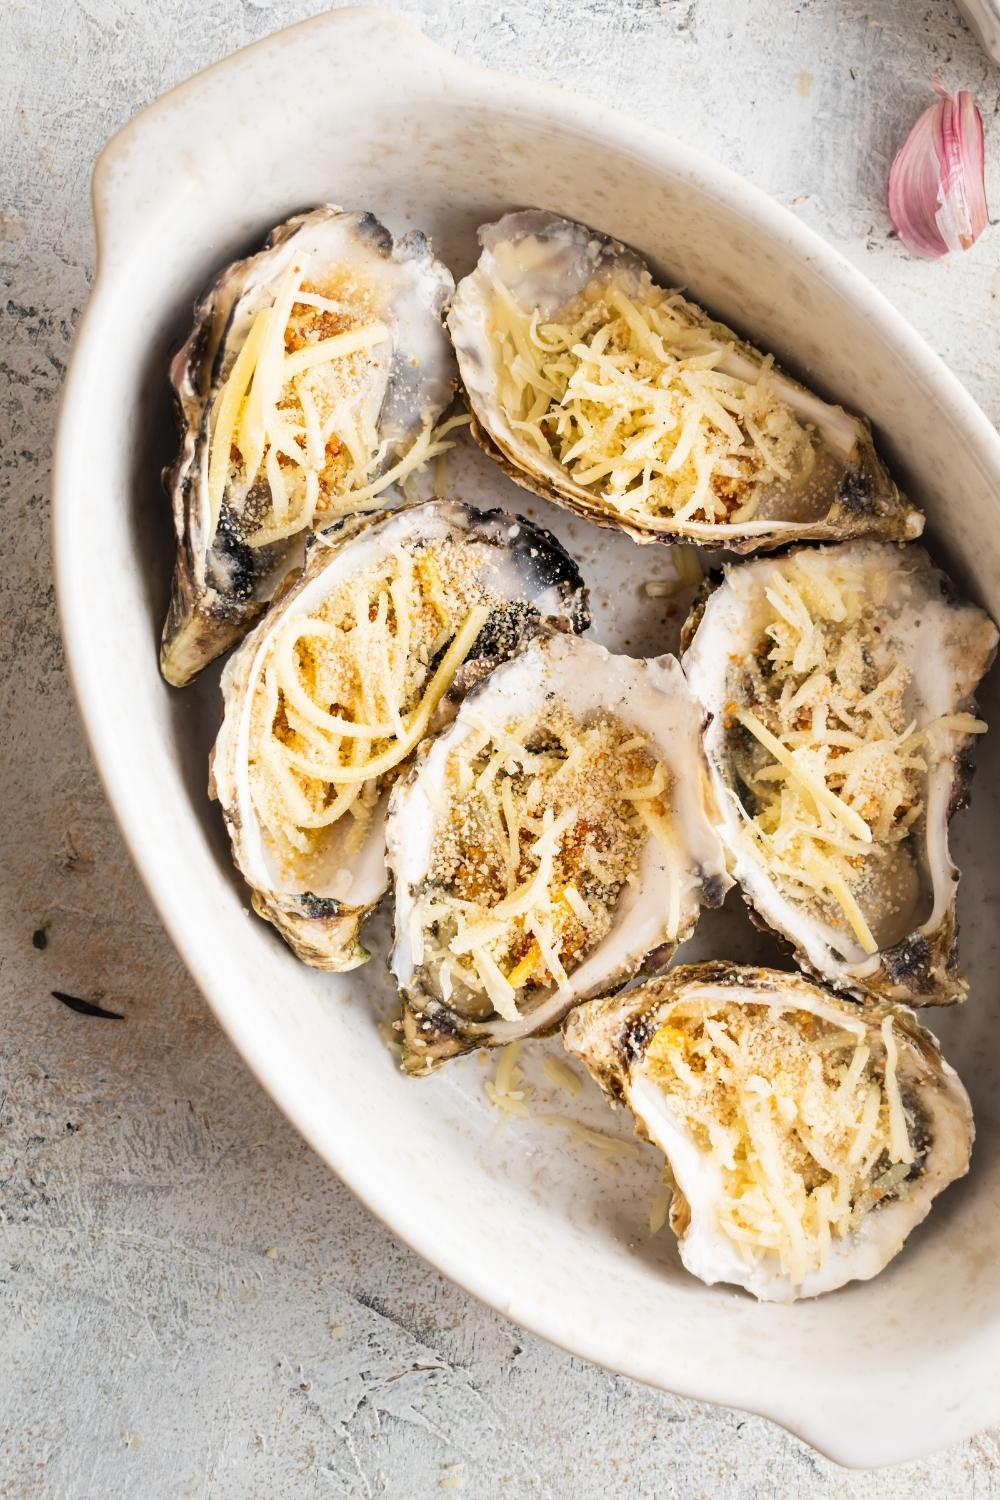 Mozzarella cheese and breacrumbs in six oysters in a baking dish.